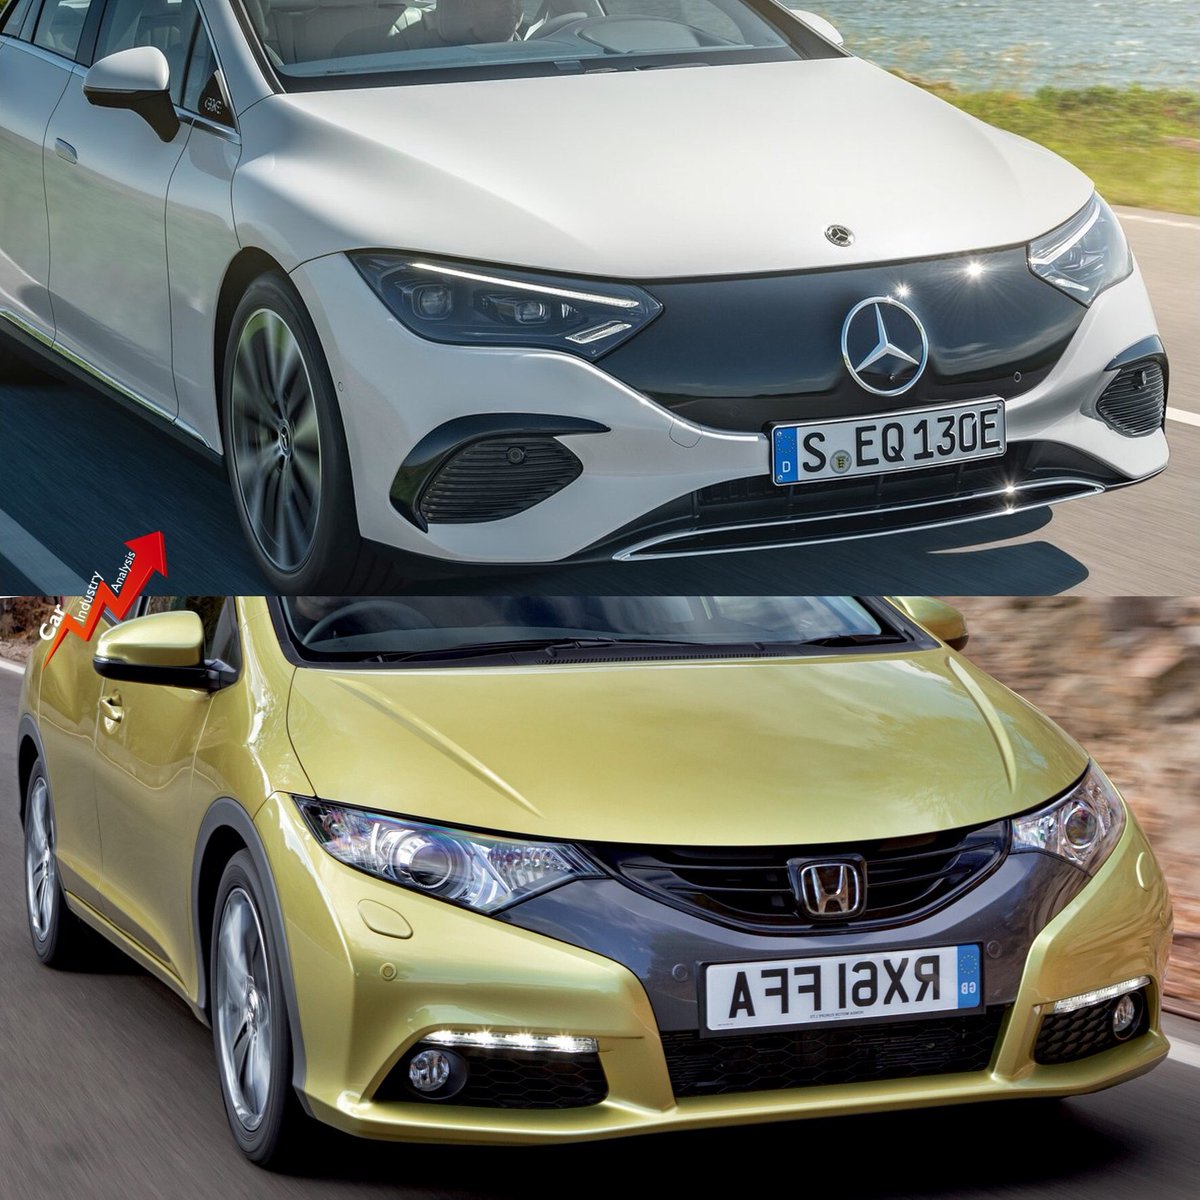 The weird proportions of the recently presented #MercedesEQE remind me the Honda Civic HB 9th gen. They have a similar hood/bonnet, like falling from the windscreen to the front bumper. They also have a similar integration headlights-grille. 

Do you see what I see?